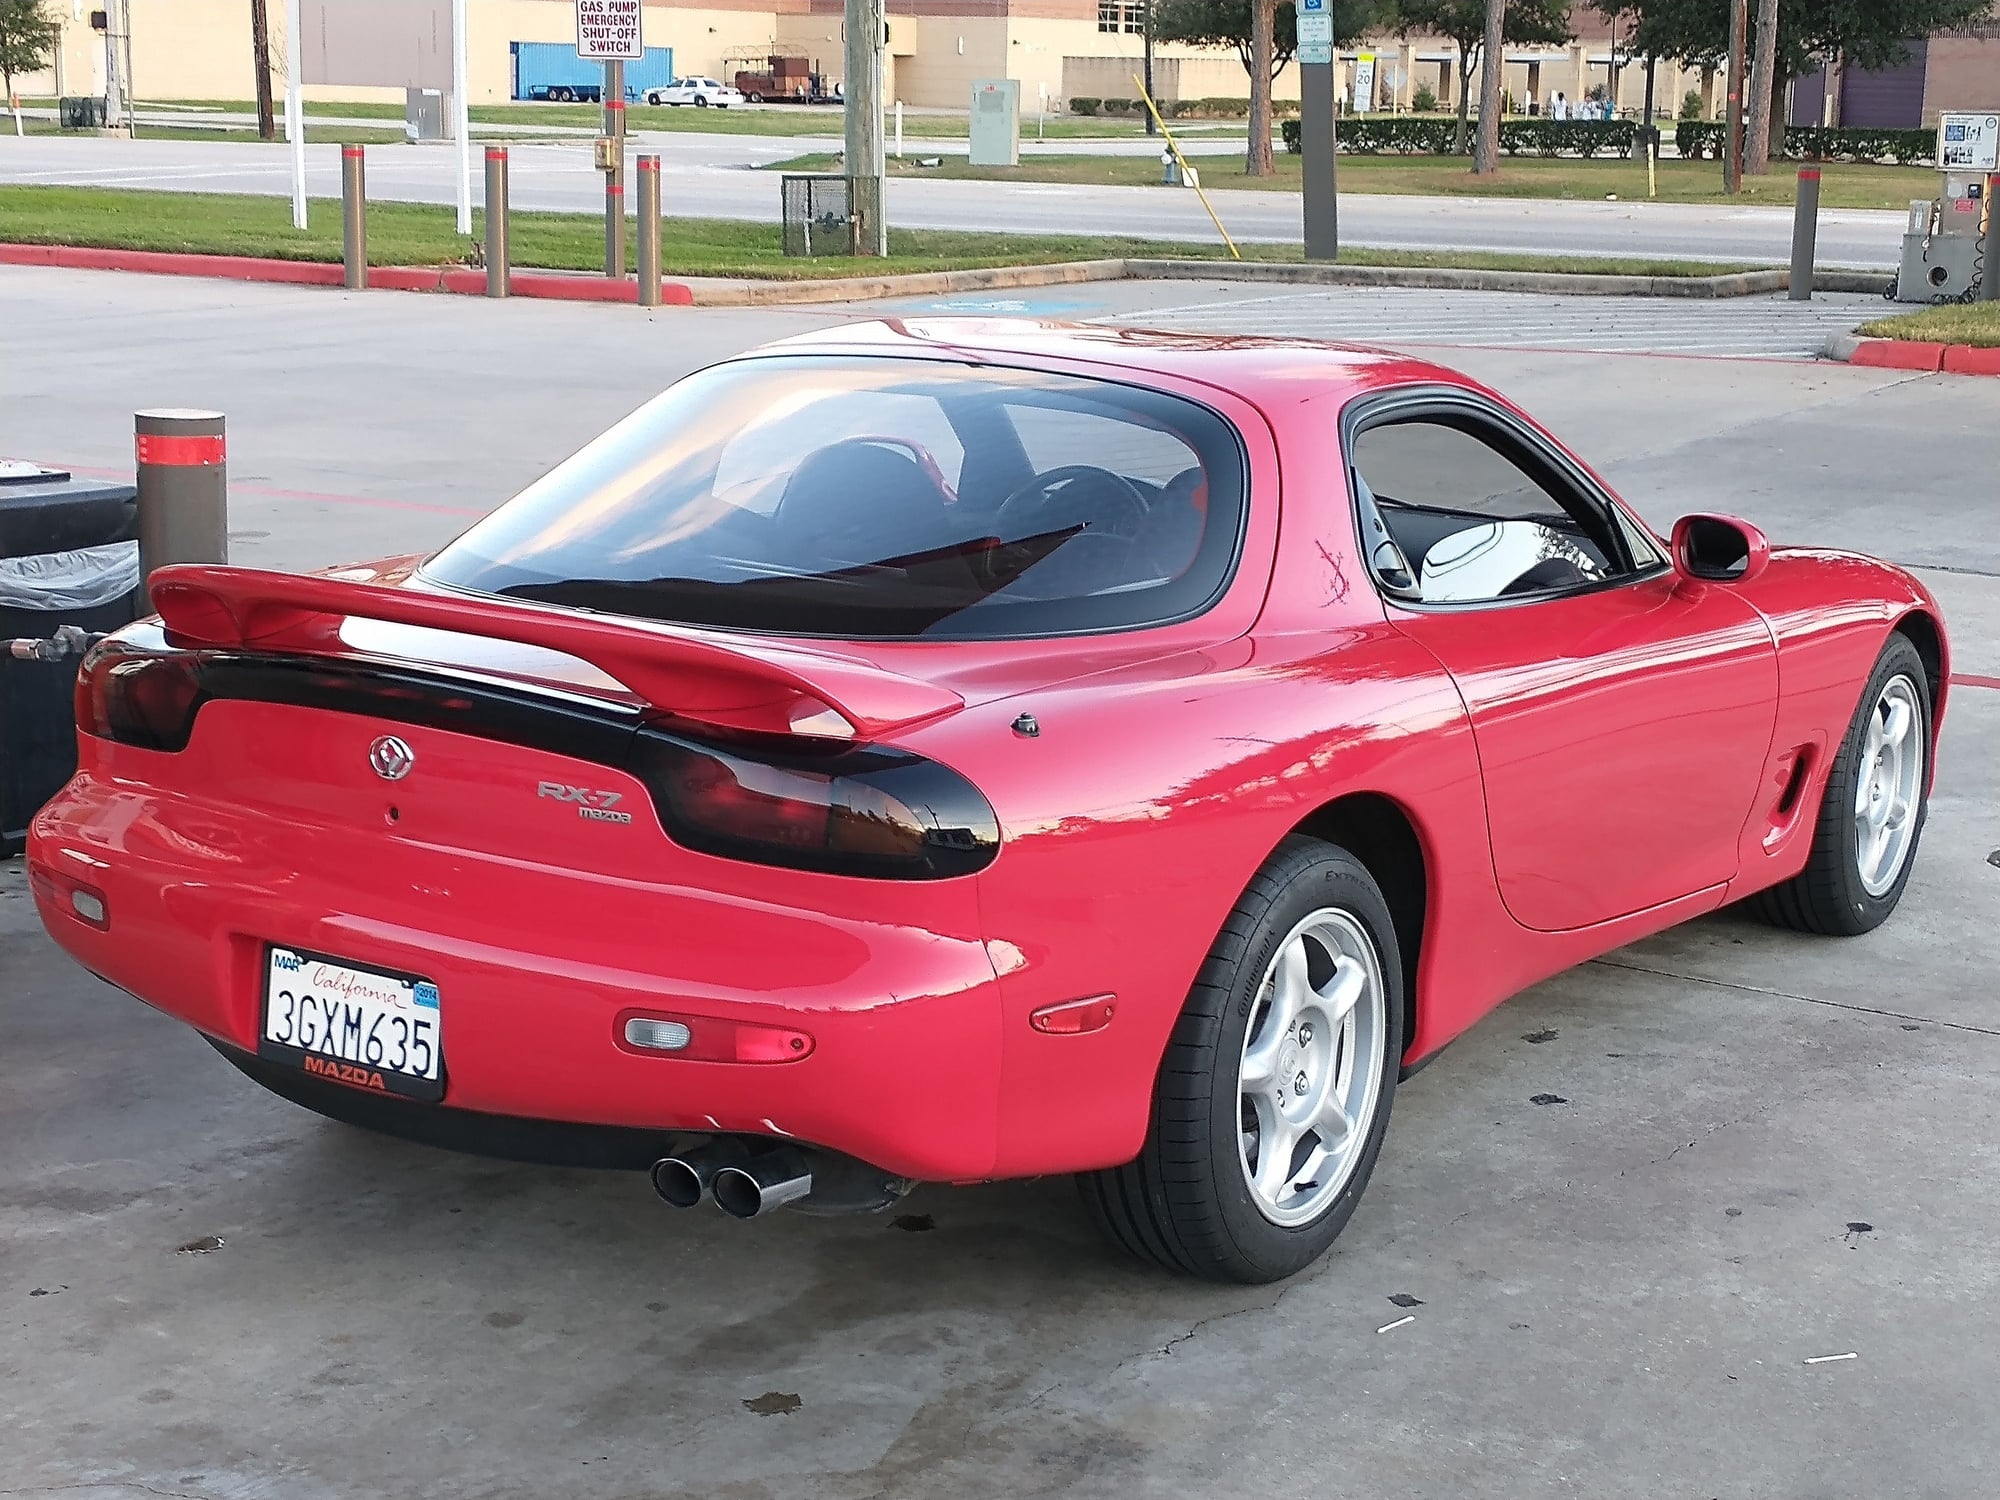 The Grail FD - 14k-Mile 1993 R1 in Vintage Red - Page 3 -  - Mazda  RX7 Forum